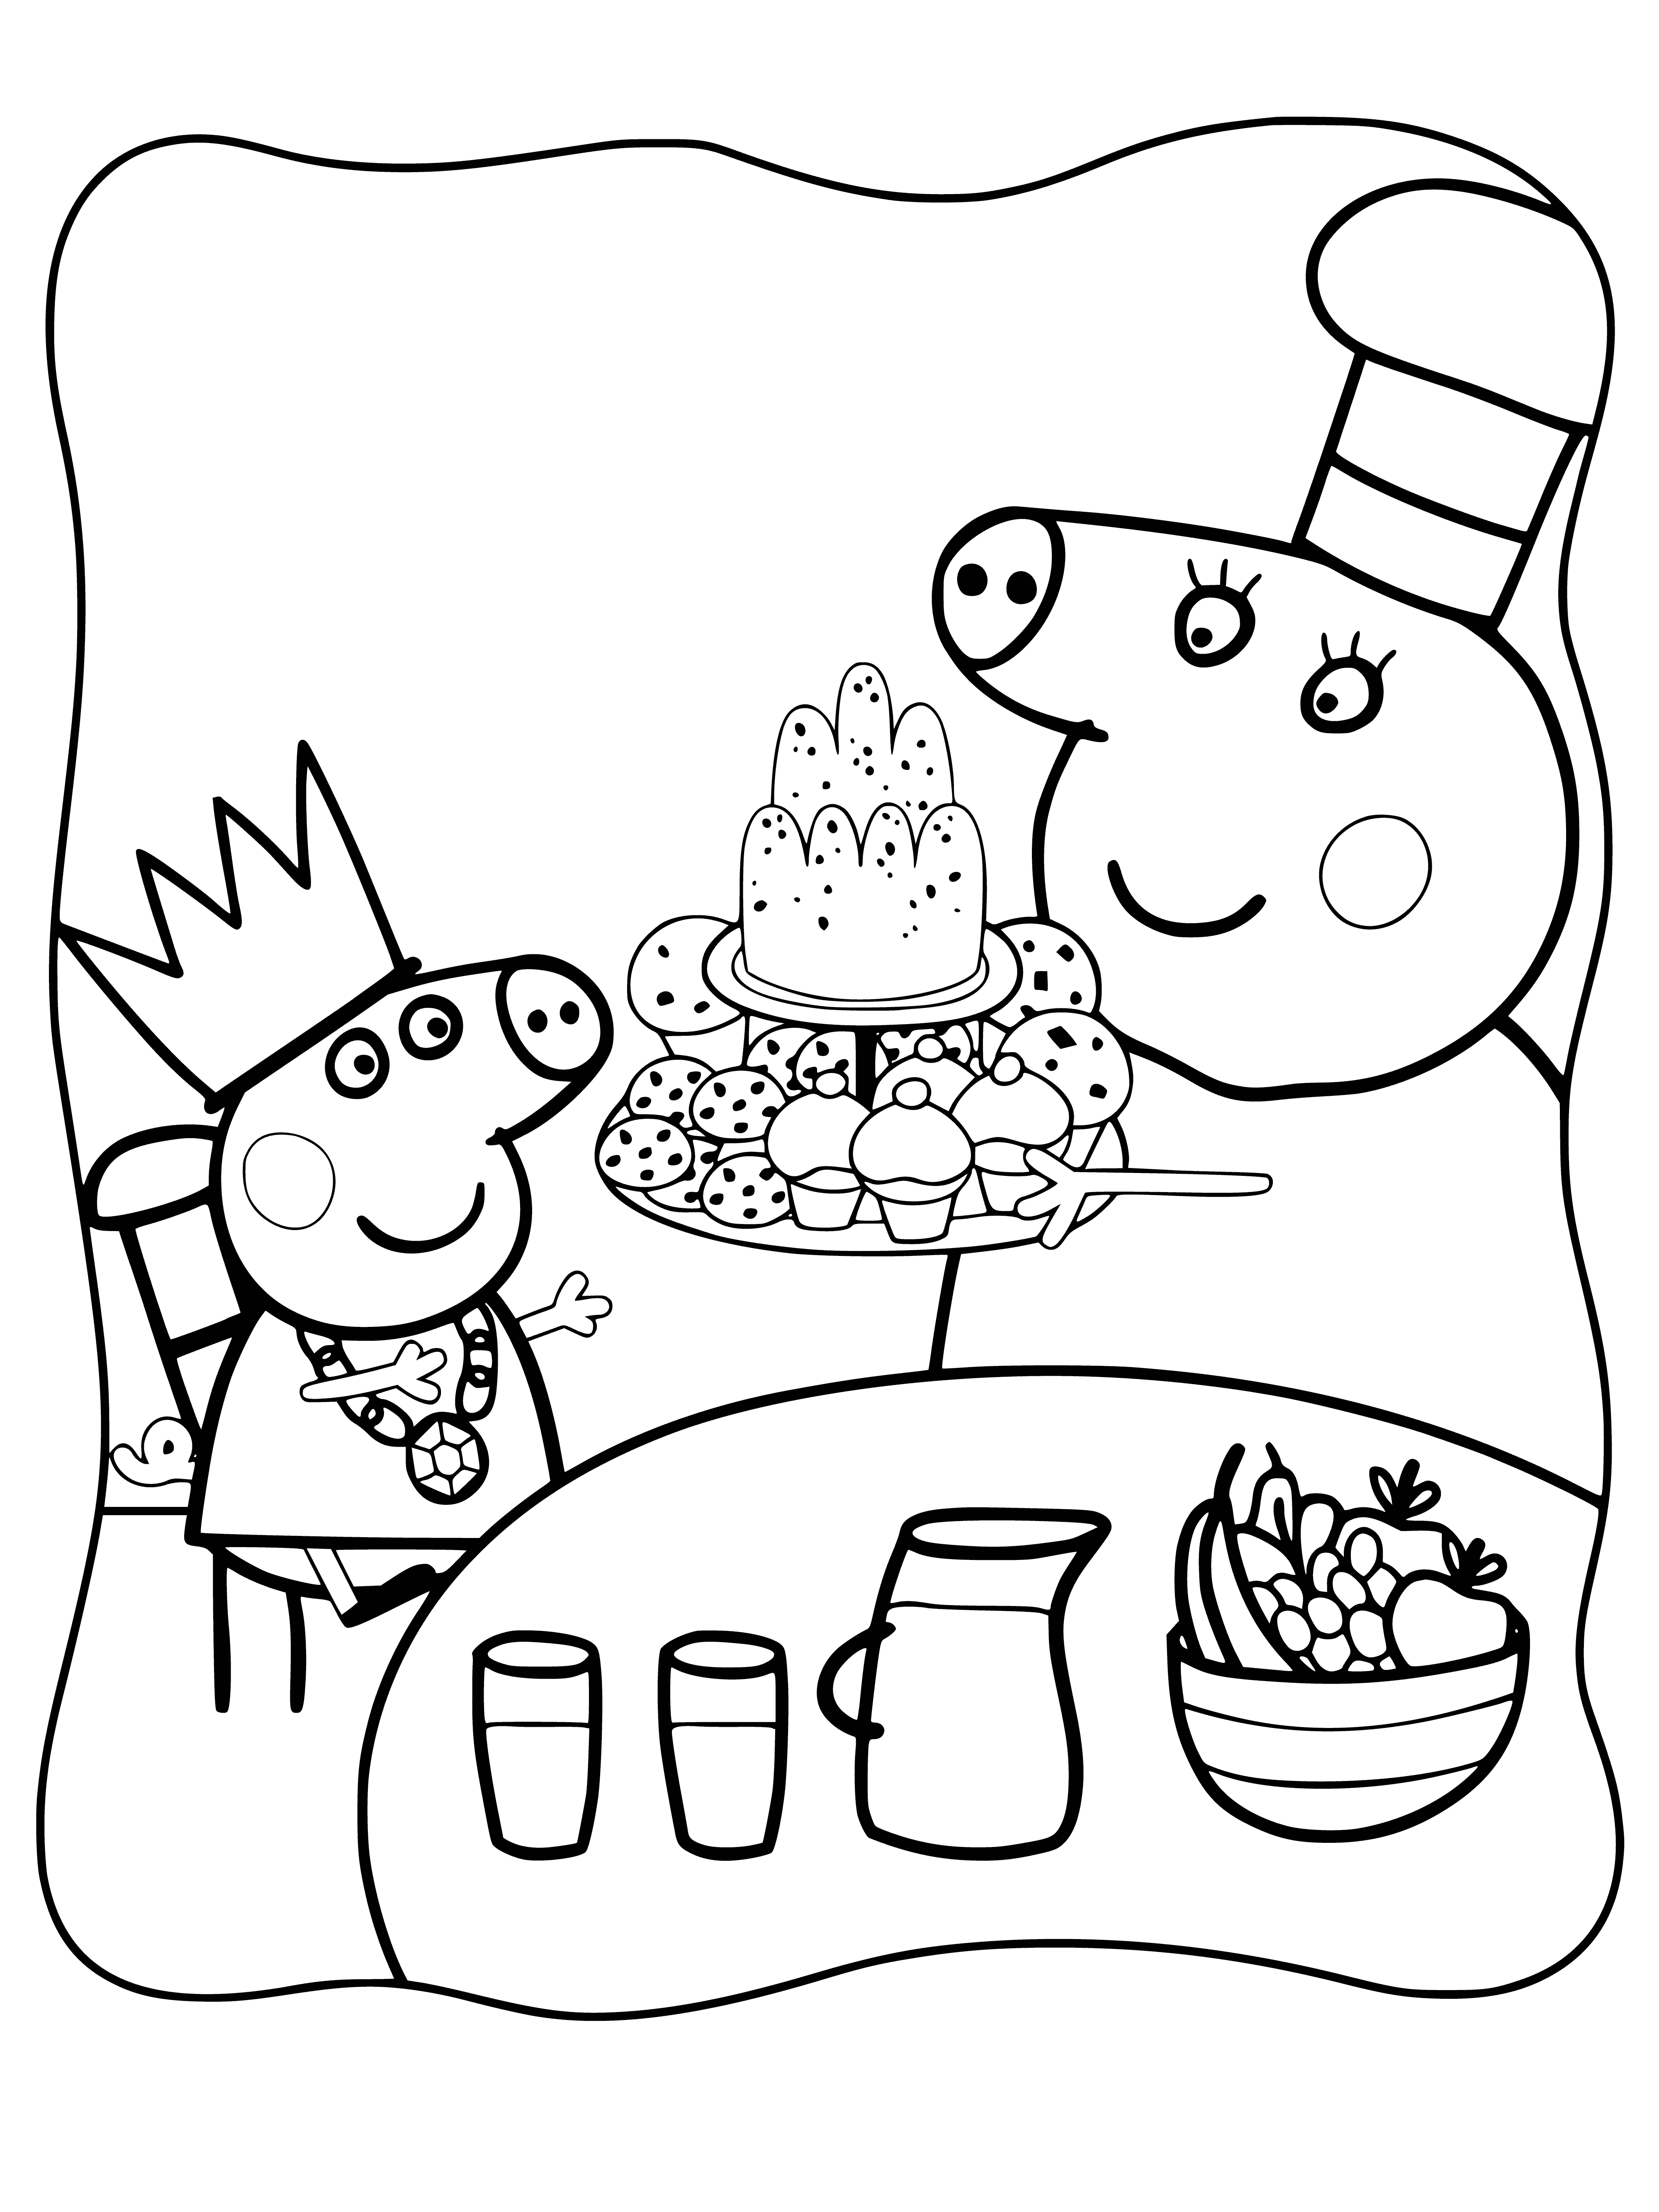 coloring page: Granny & Peppa Pig sit at a table with a sandwich, cake, & cup of tea. Granny smiles with a teaspoon in hand. Peppa looks on.